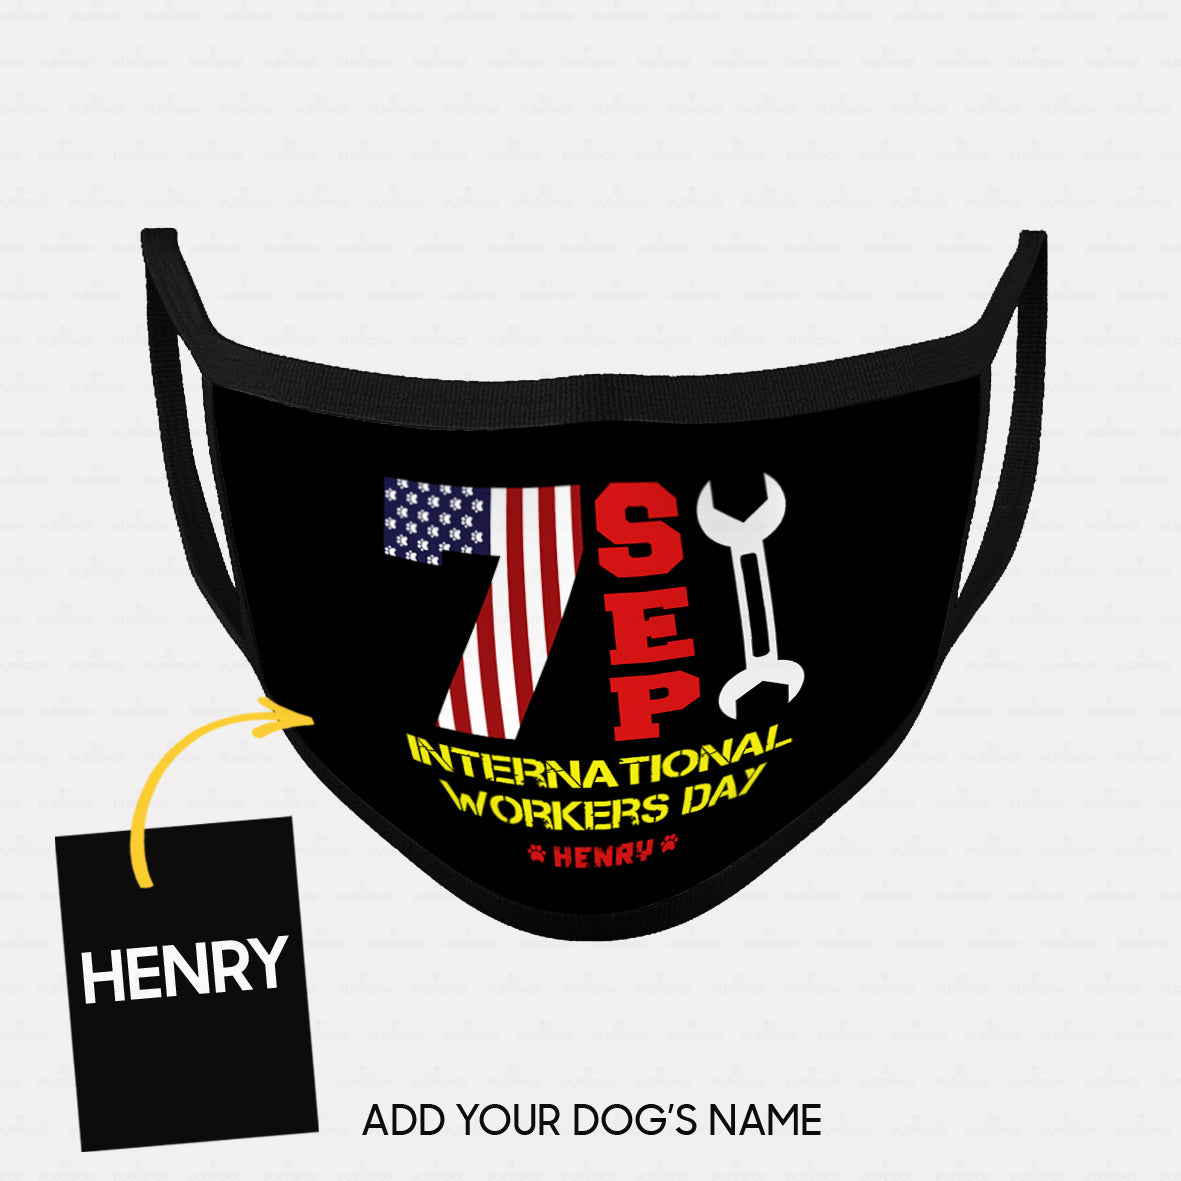 Personalized Dog Gift Idea - International Workers Day For Dog Lovers - Cloth Mask